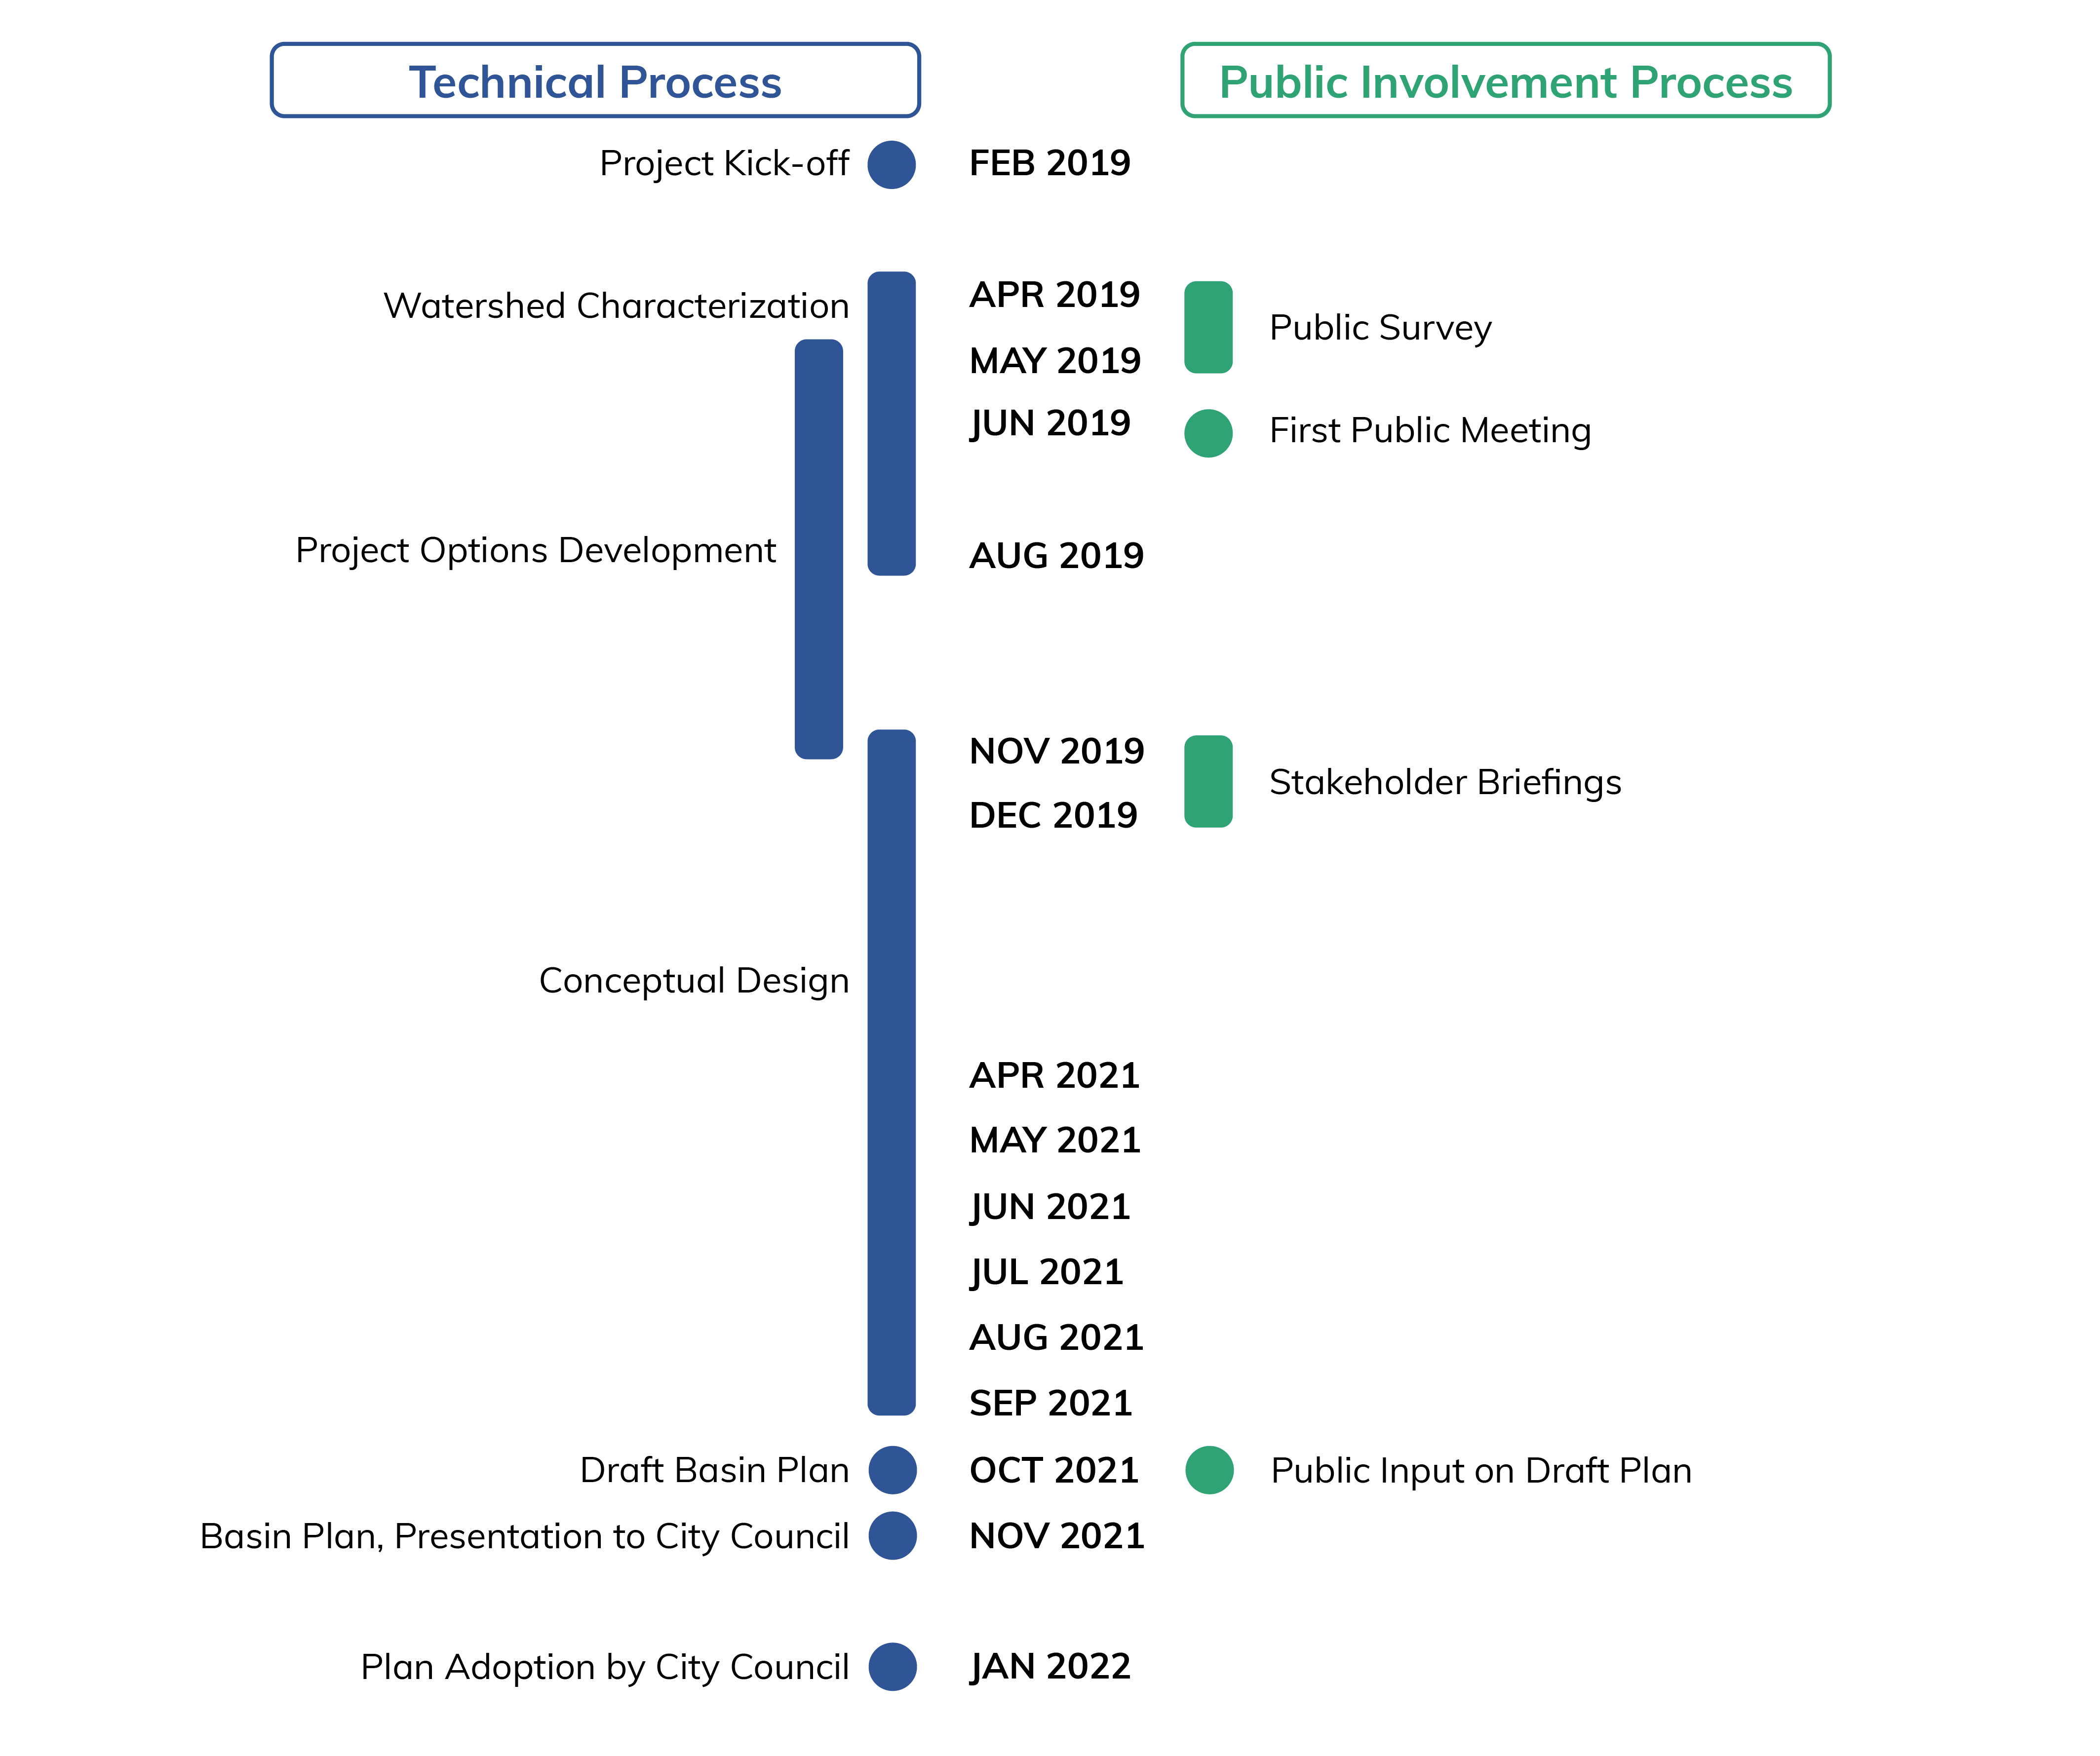 Laughing Jacobs Basin Plan timeline showing both technical and public process stages, running from 2019 through plan adoption in 2022